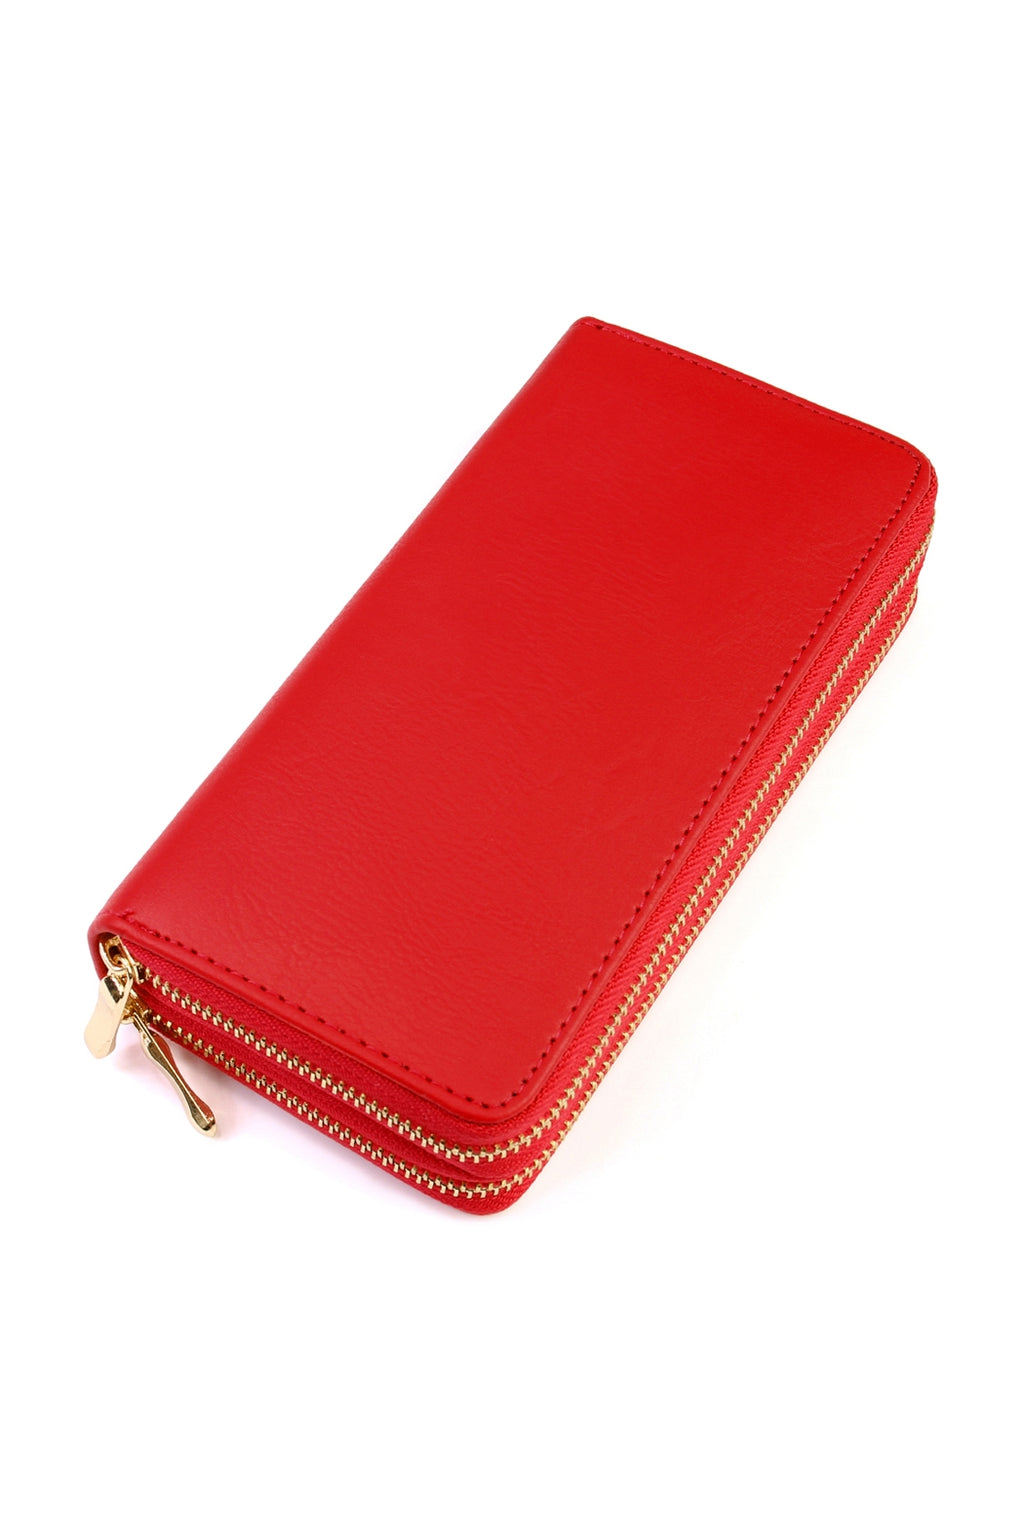 Red Double Zipper Wallet - Pack of 6